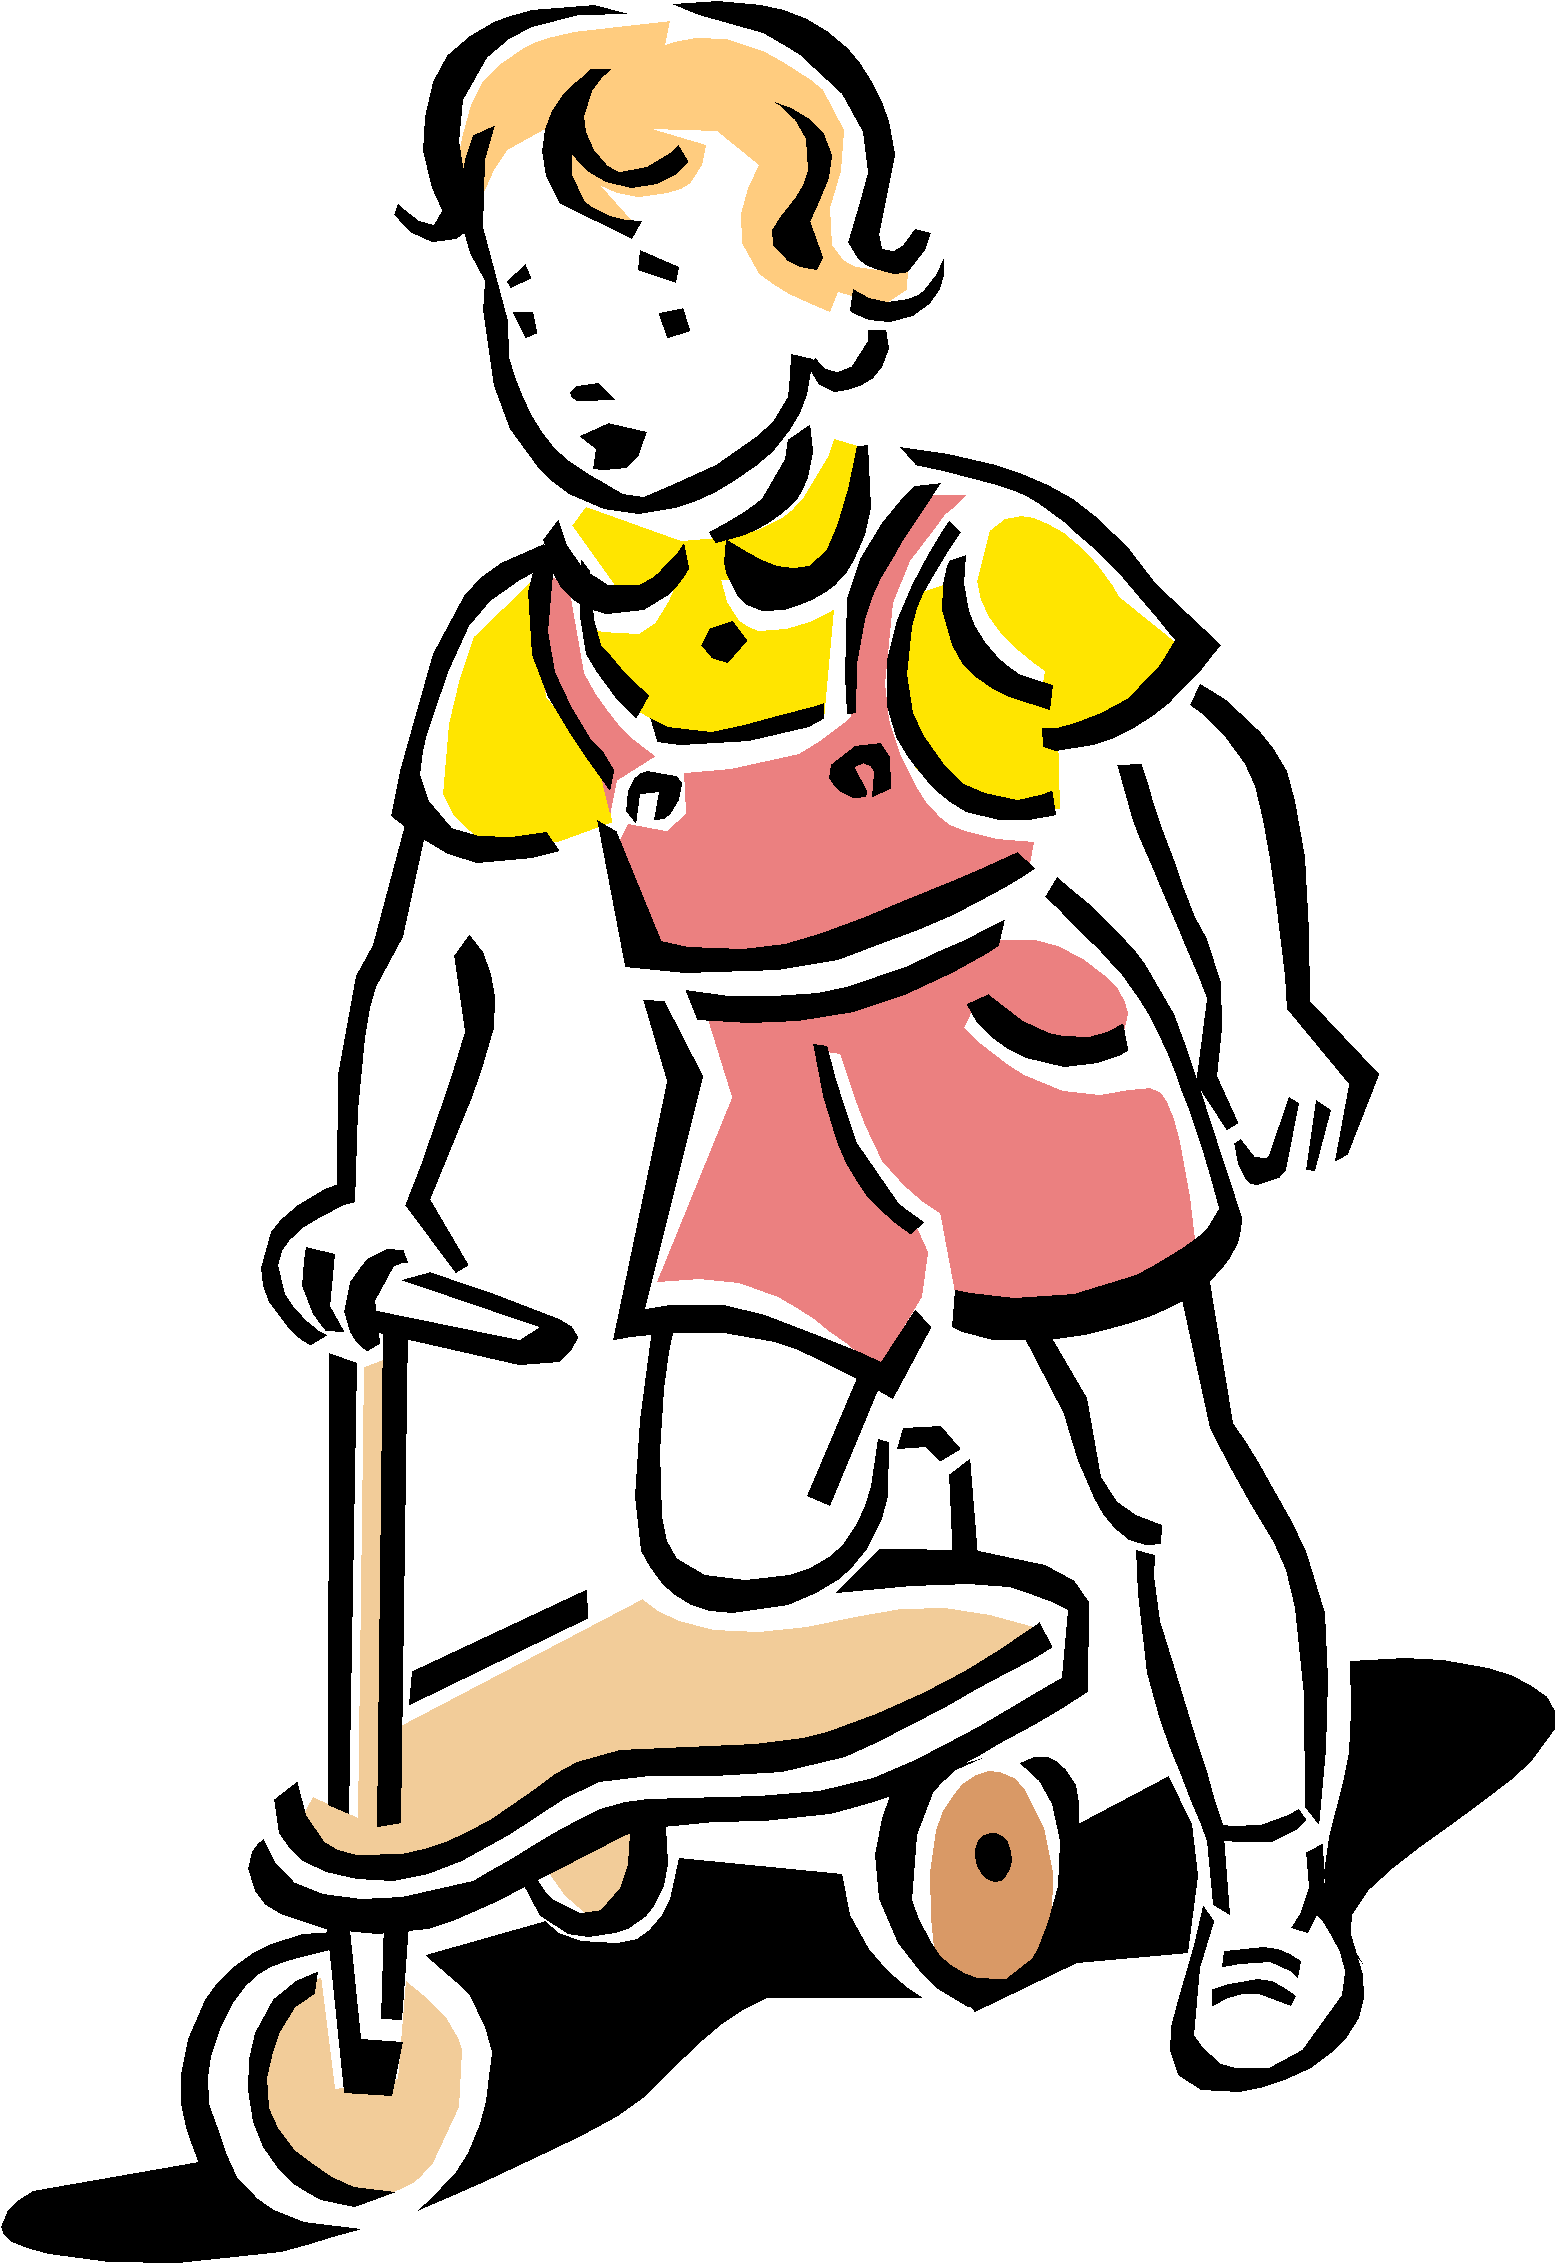 A Cartoon Of A Child Riding A Scooter